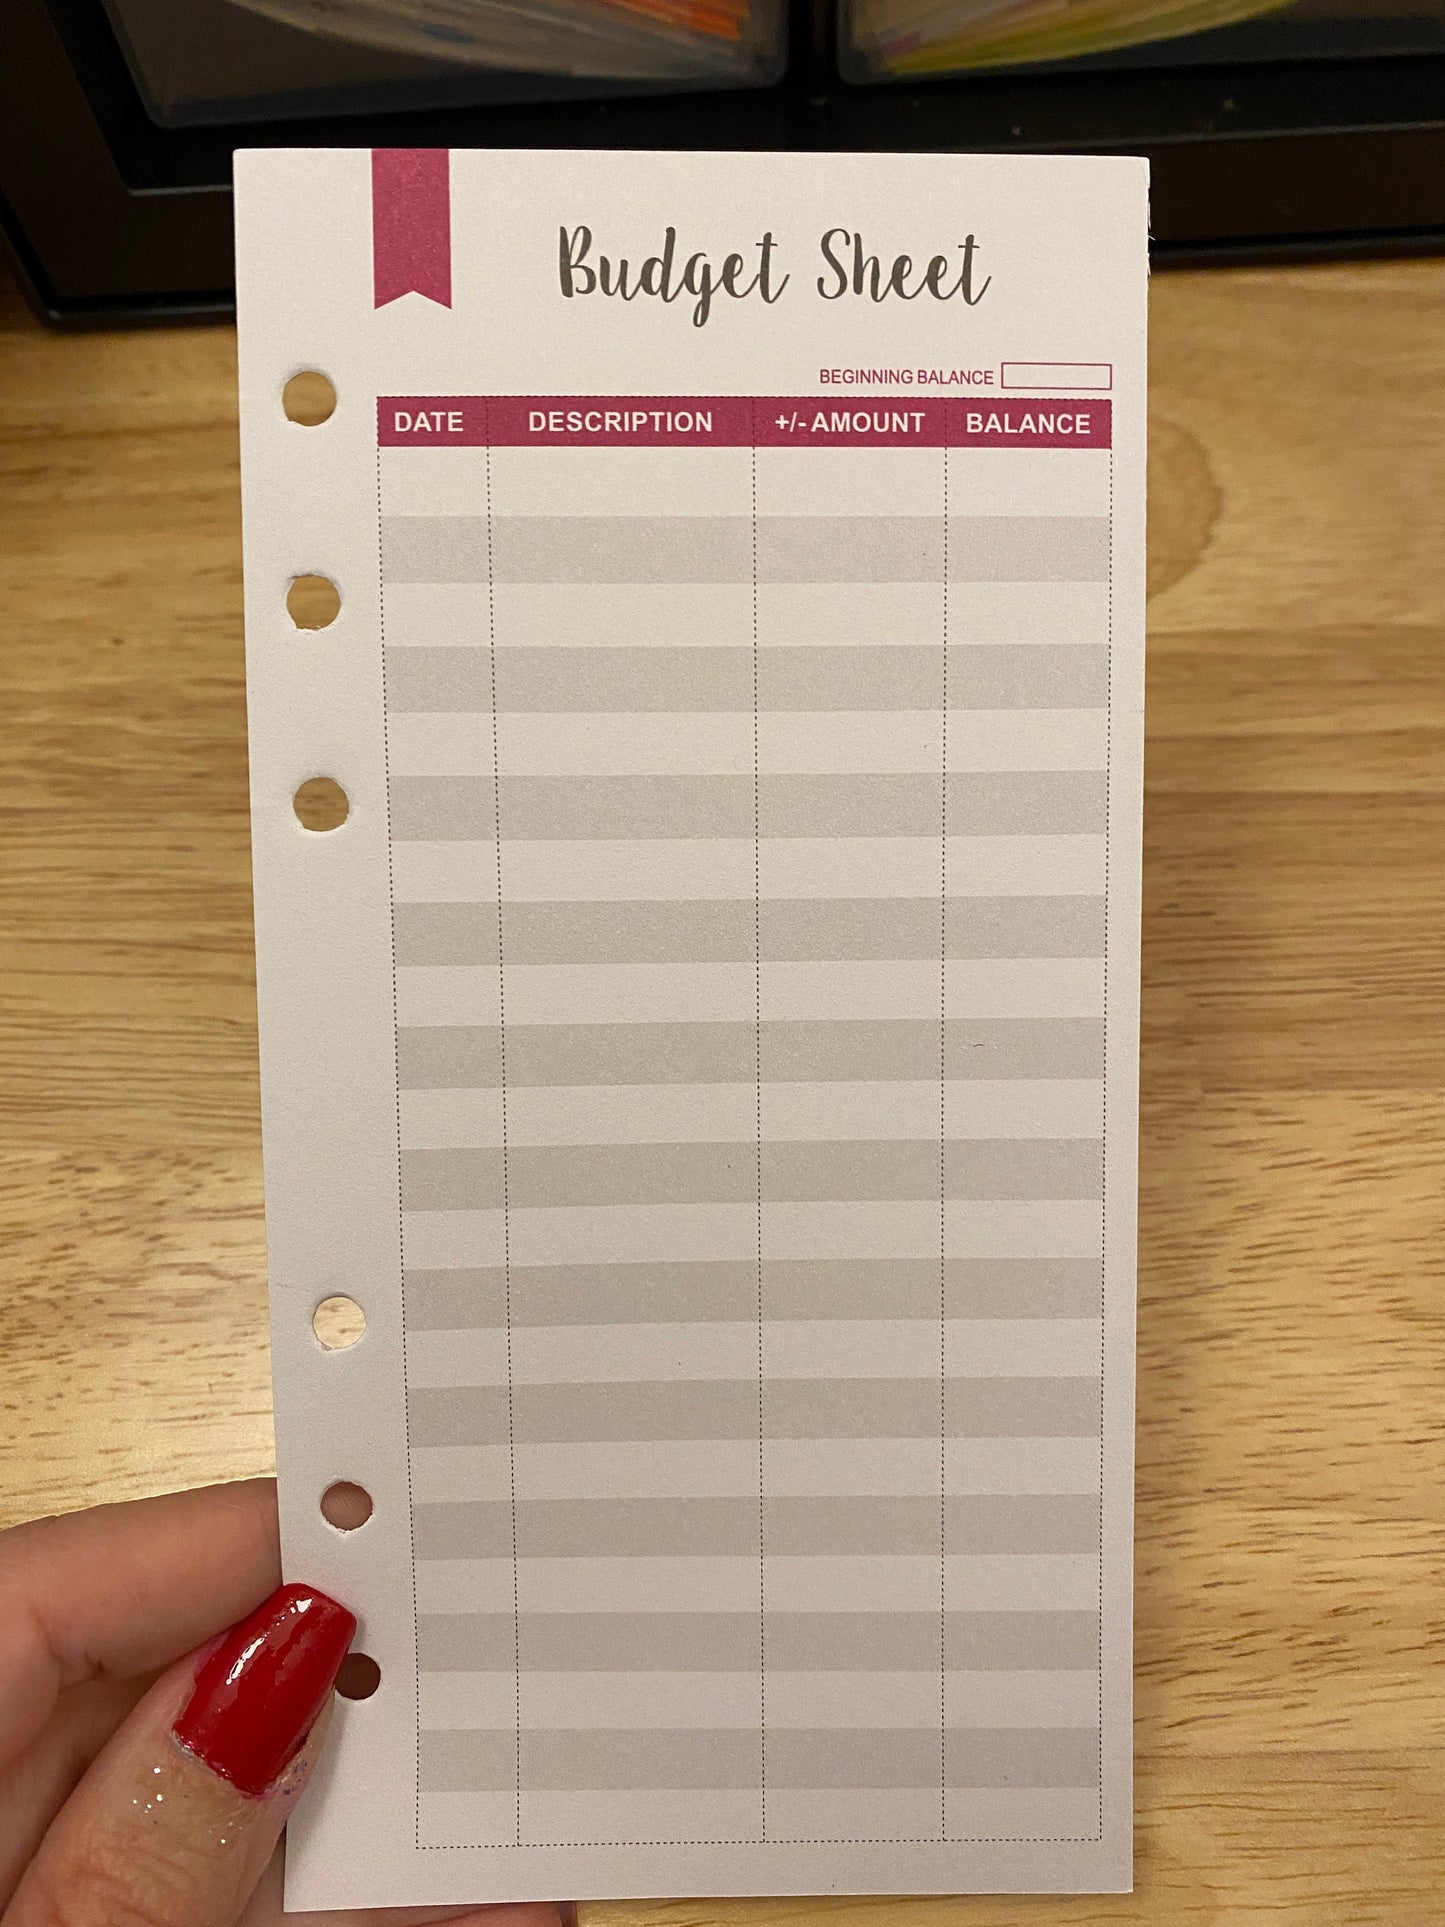 Cash Budgeting Sheets, Budget Insert Trackers for A6 Binders